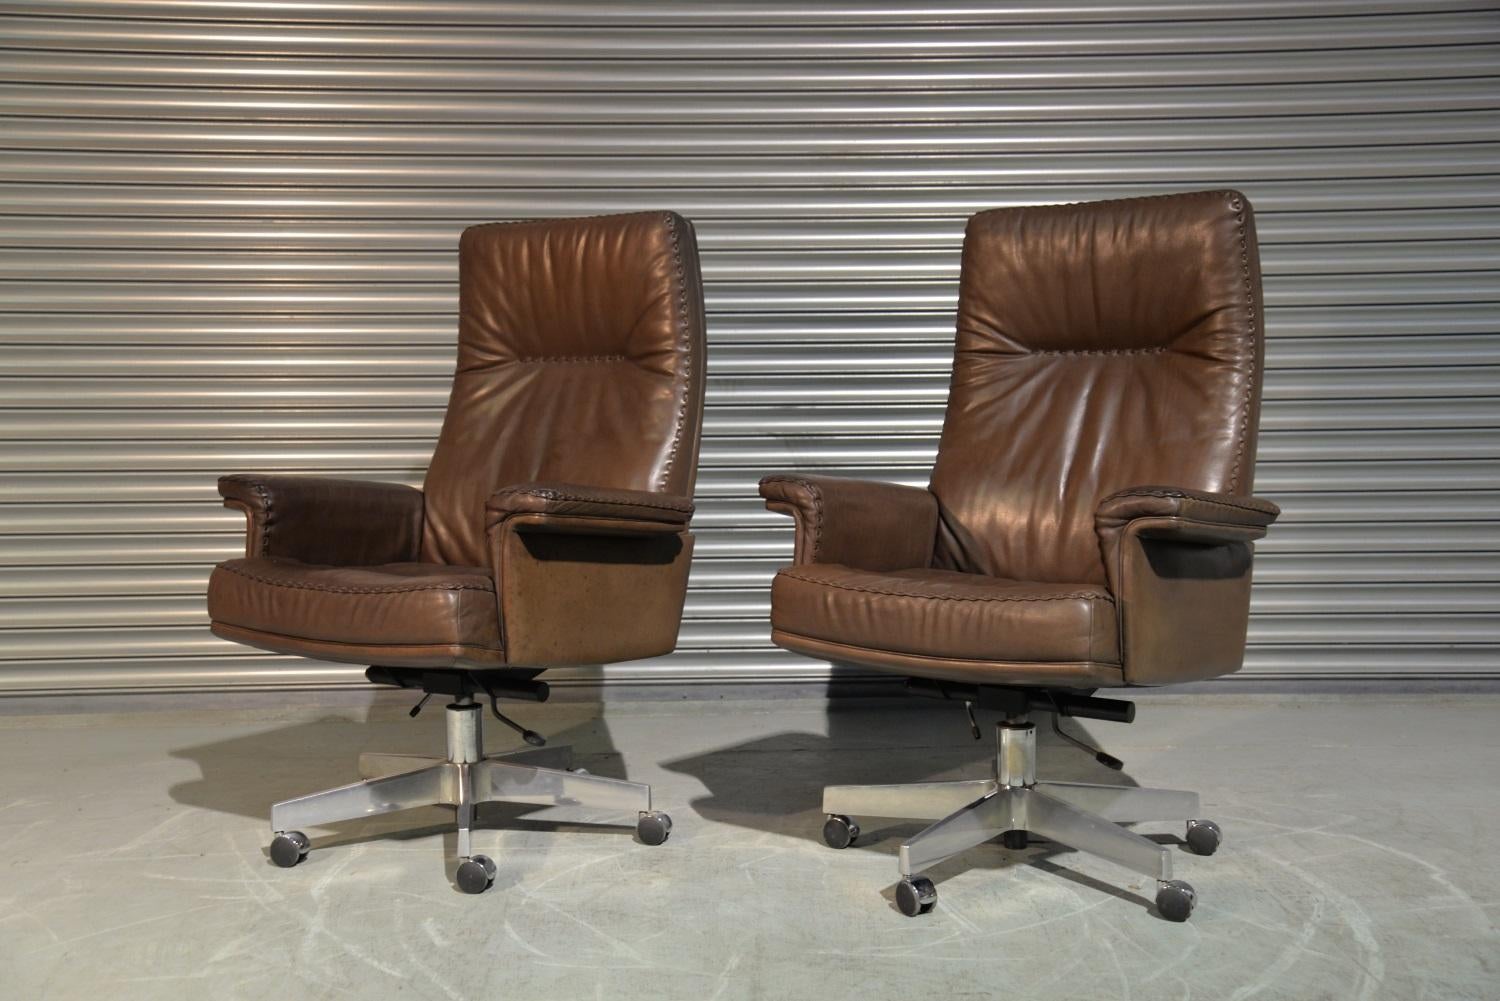 Discounted airfreight for our US and International customers ( from 2 weeks door to door) 

We are delighted to bring to you a pair of vintage De Sede DS 35 Executive armchairs on casters. Hand built to incredibly high standards by De Sede craftsman